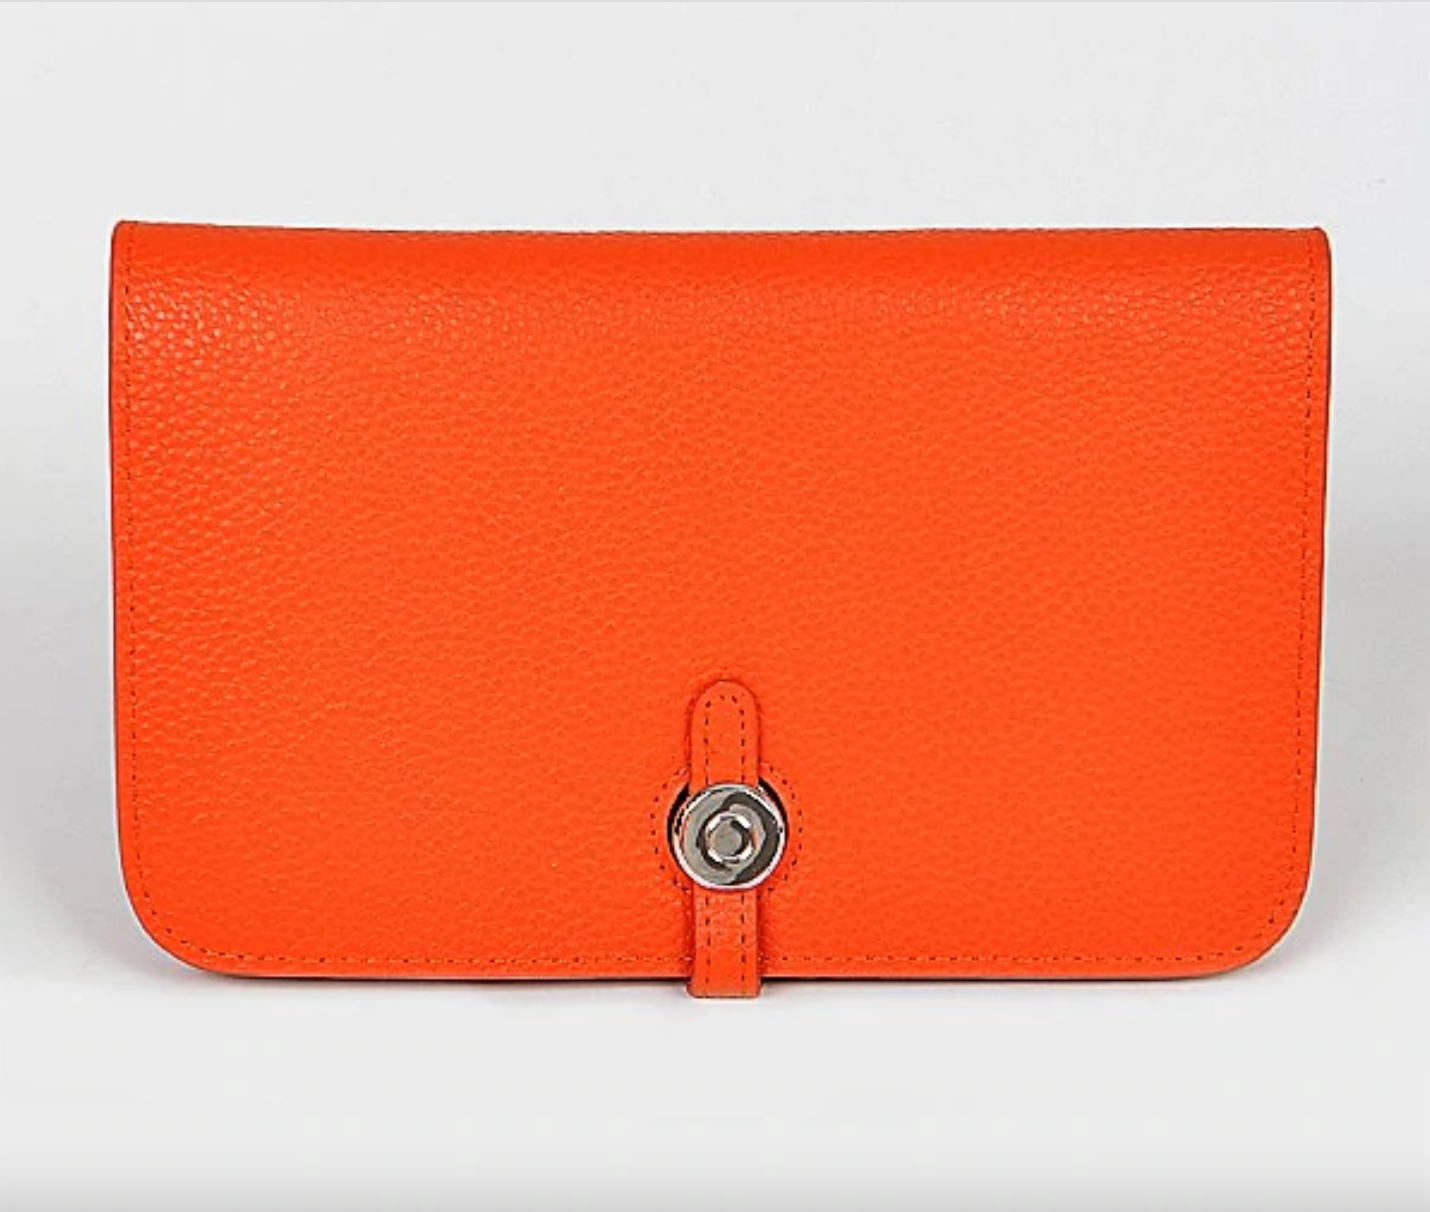 Hermes-Dogon Compact Wallet